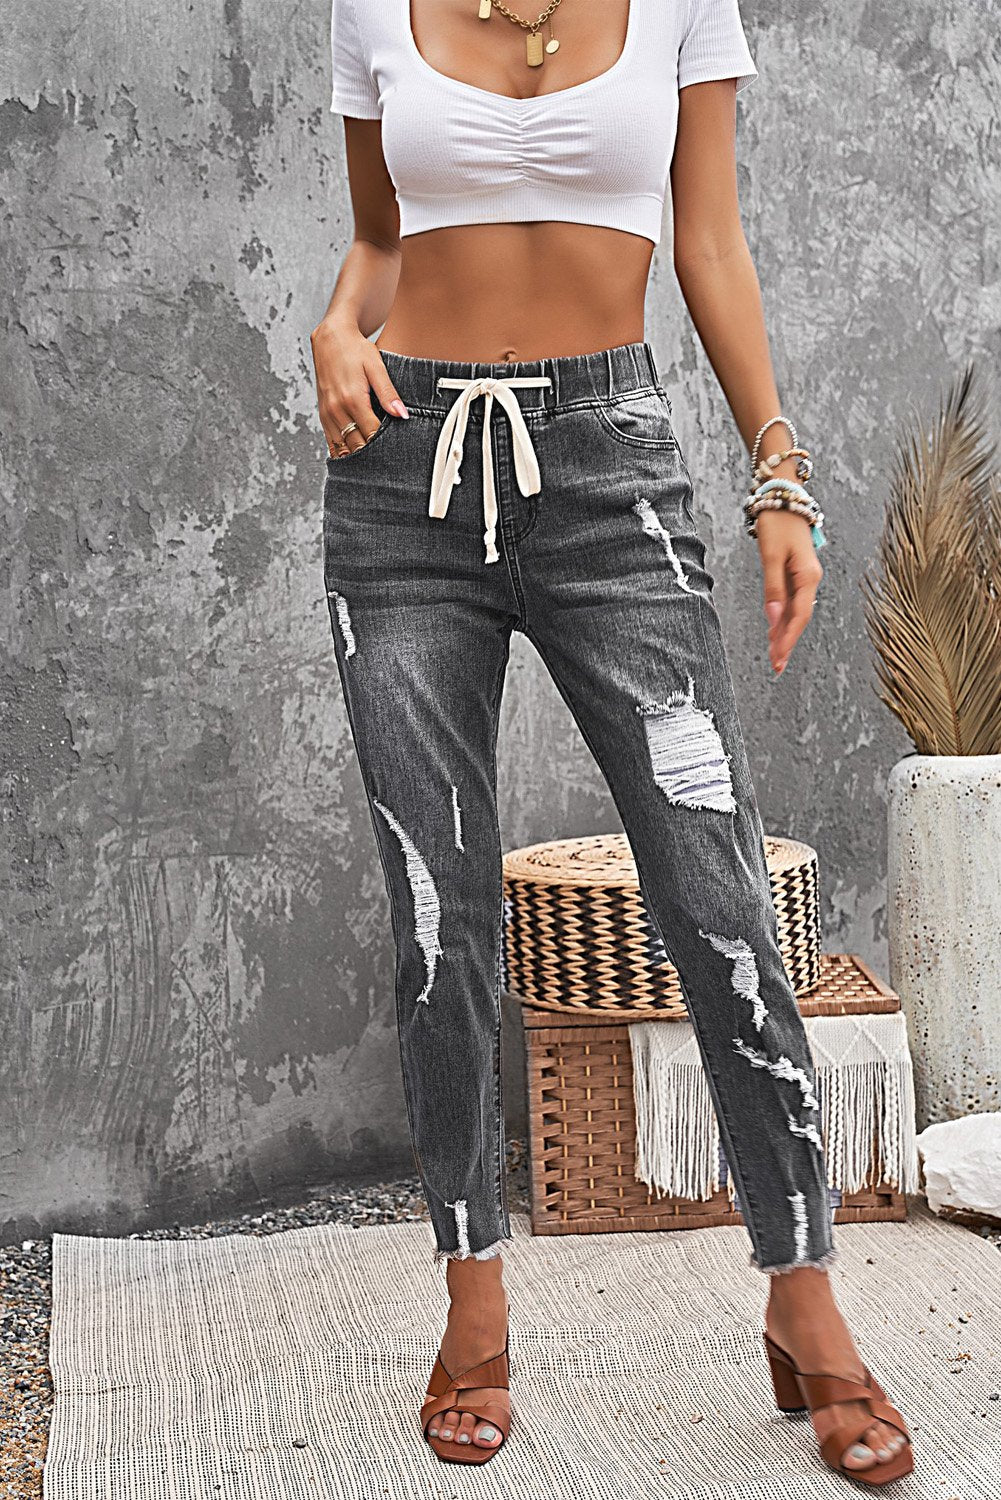 Gray Drawstring Elastic Waist Hole Ripped Jean - All Good Laces